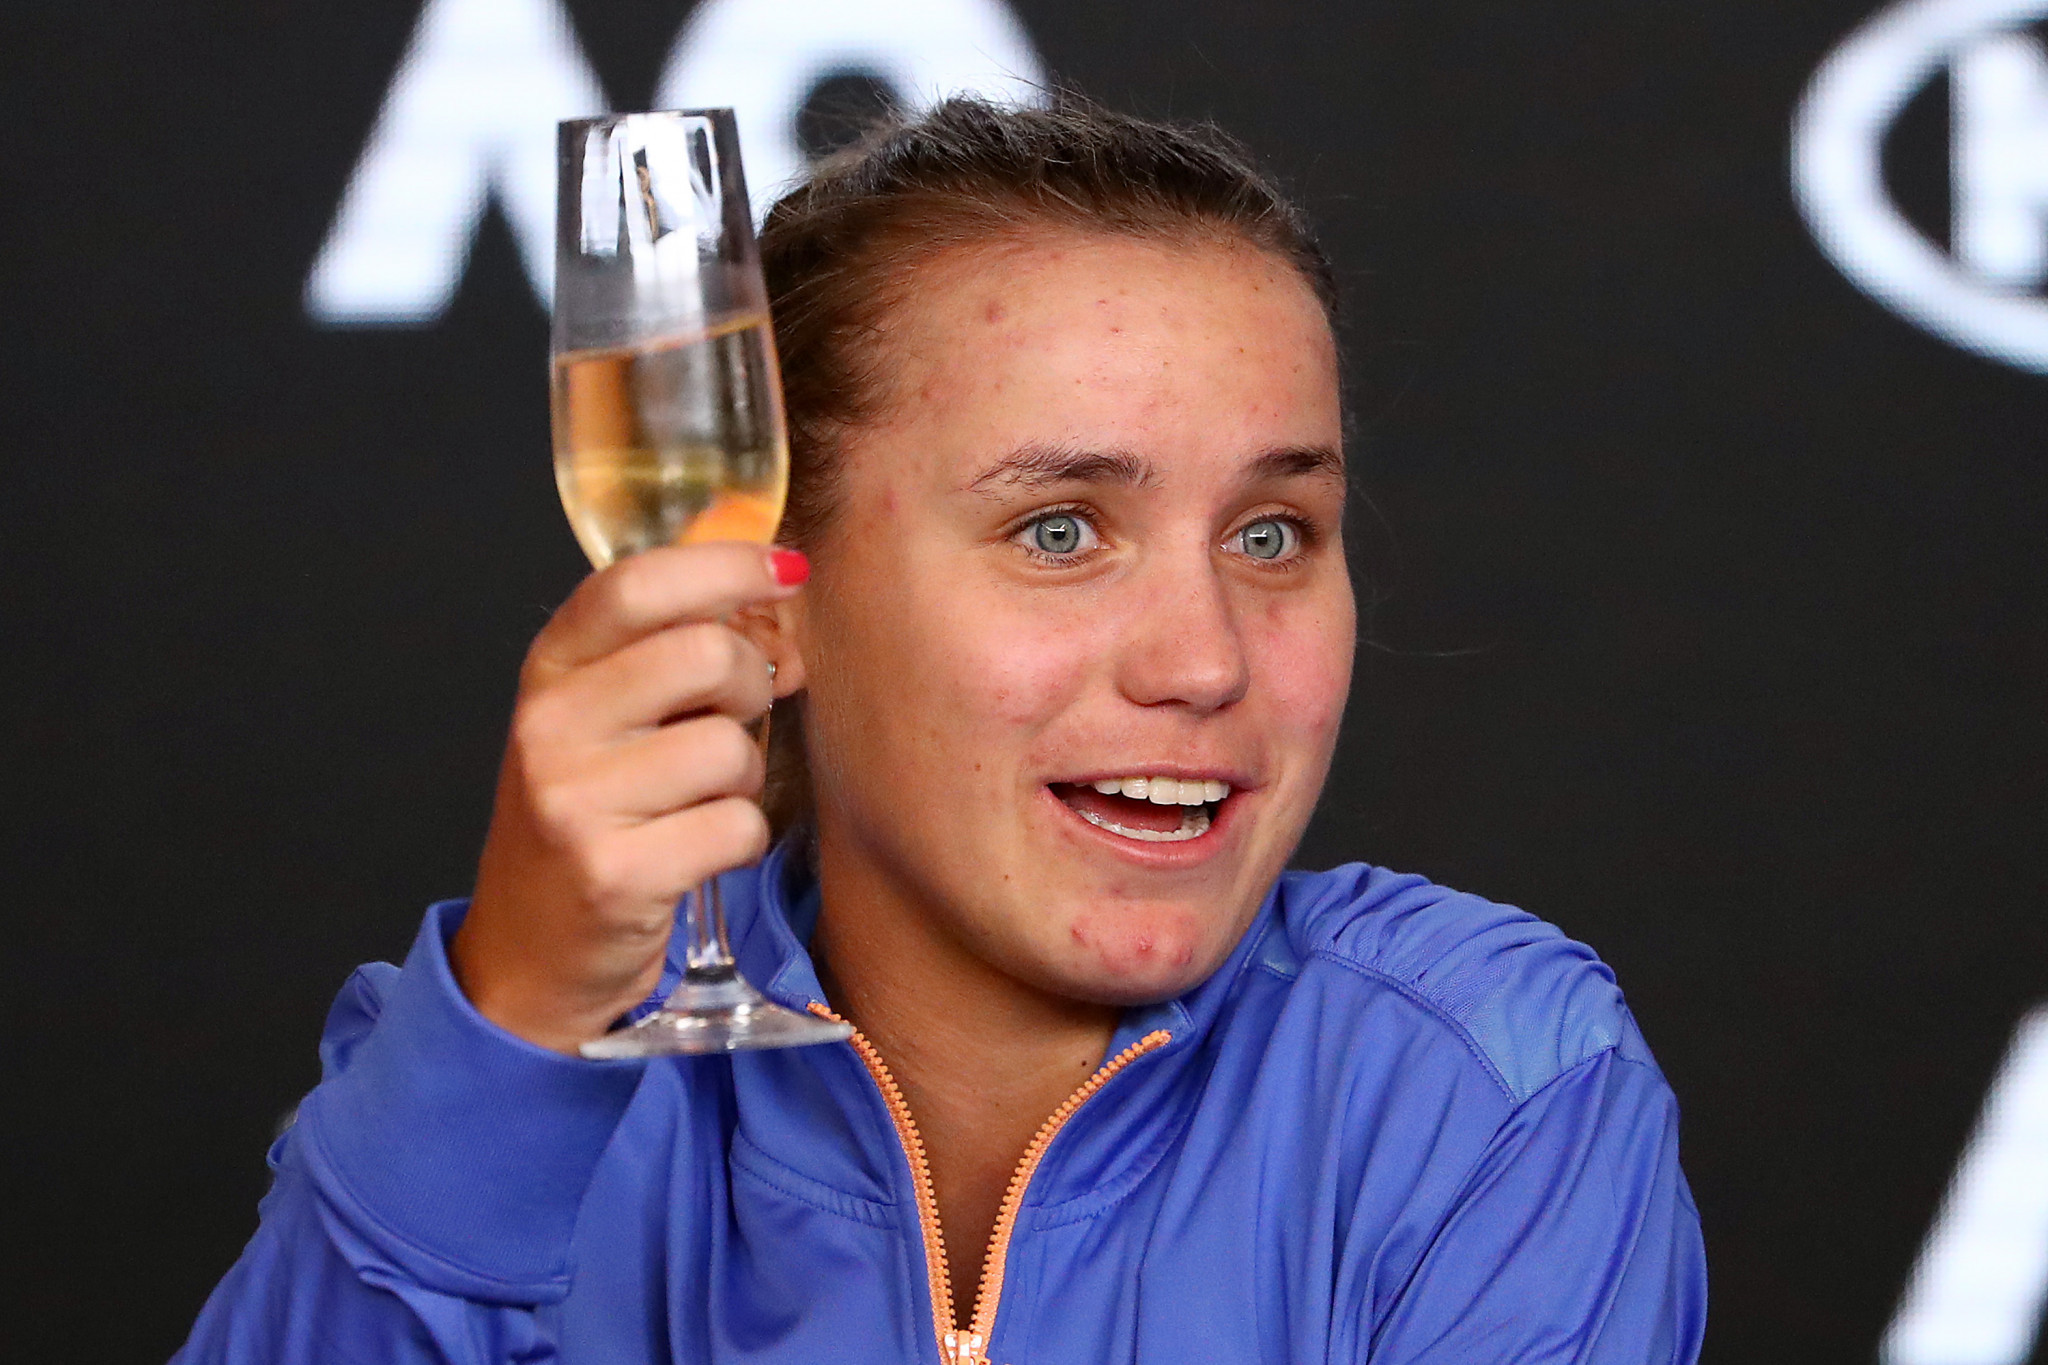 The American toasted victory in the post-match press conference ©Getty Images